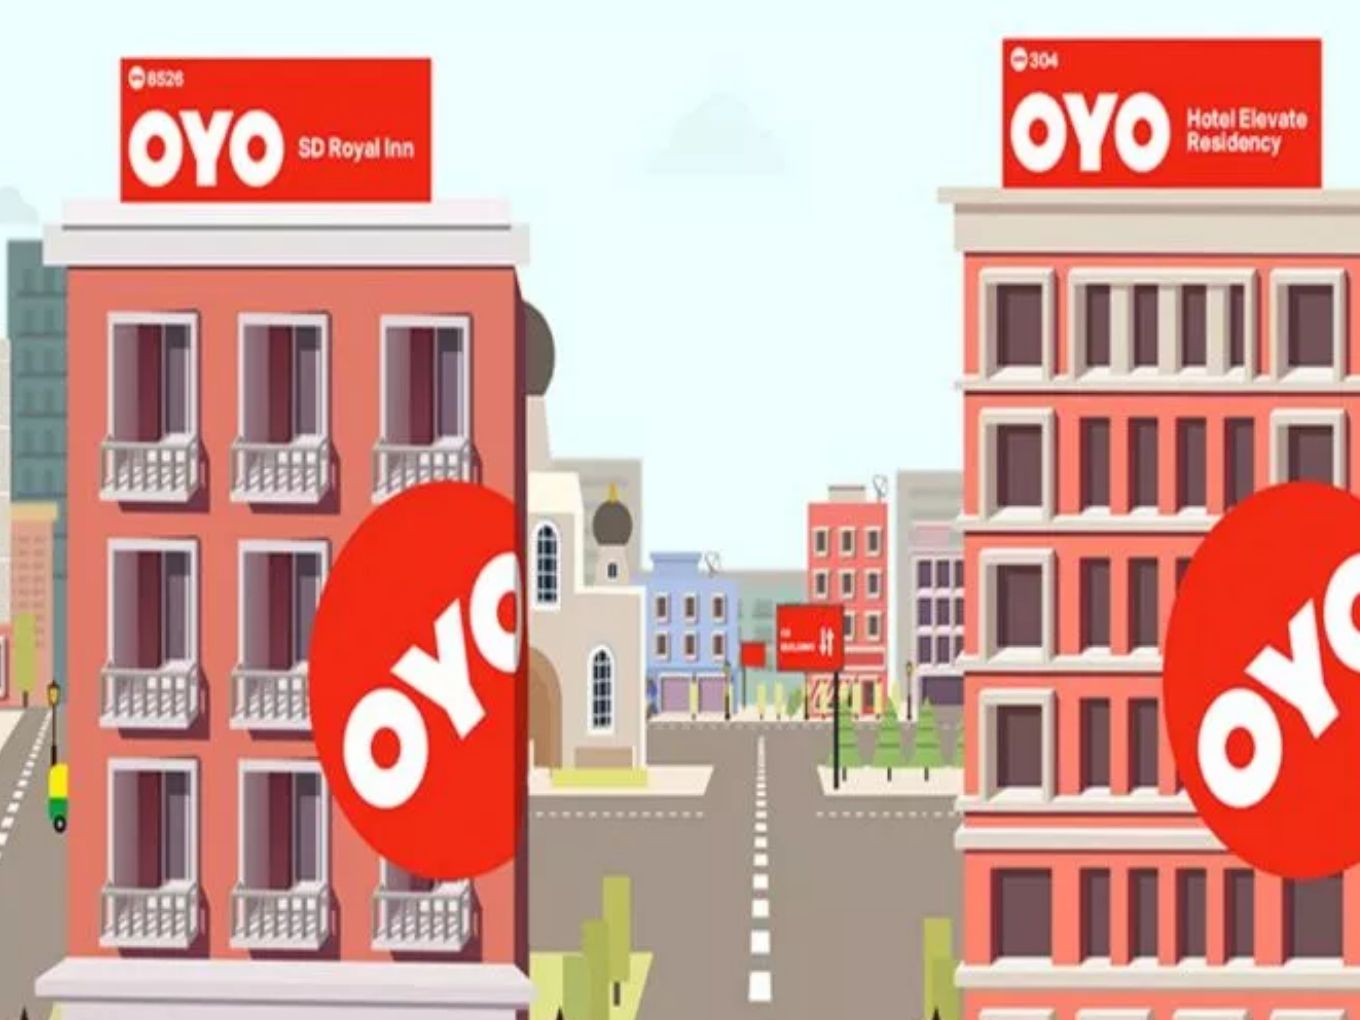 Oyo Registers 2.7X Bookings In 2019 Amid Hotel Owners' Rising Dissent